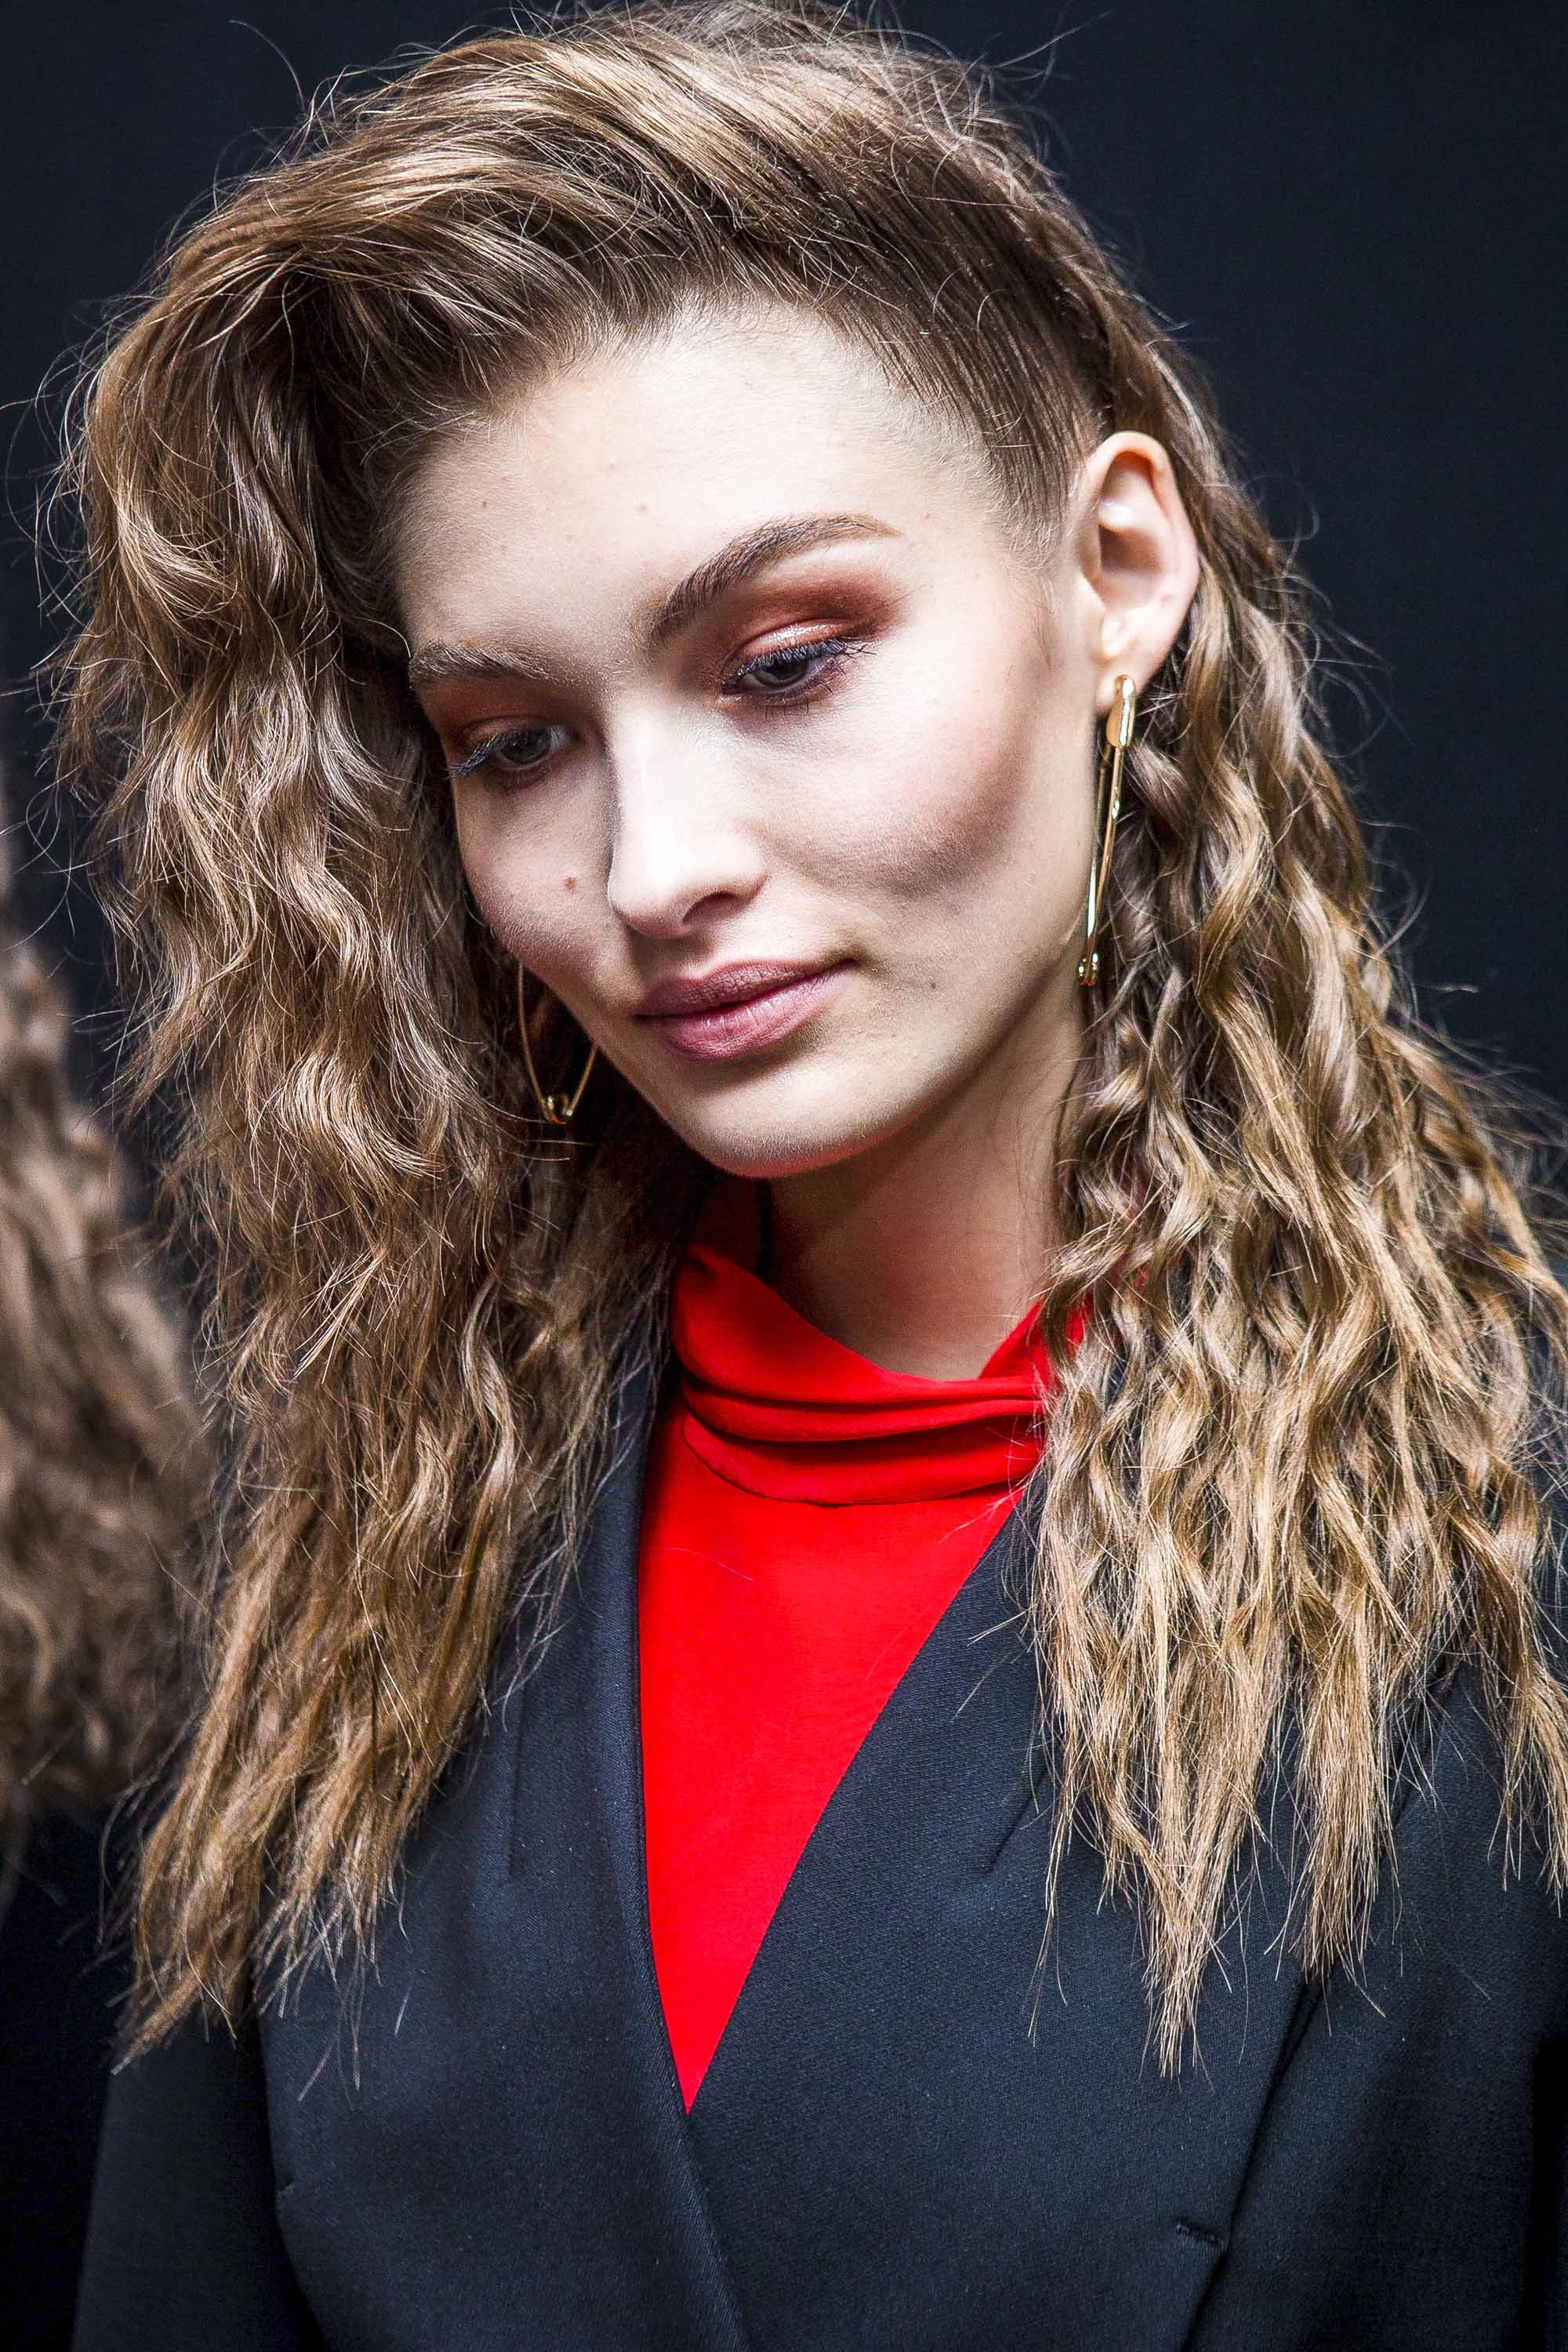 London Fashion Week 2016 Crimped hair Topshop Unique - pictures - All Things Hair